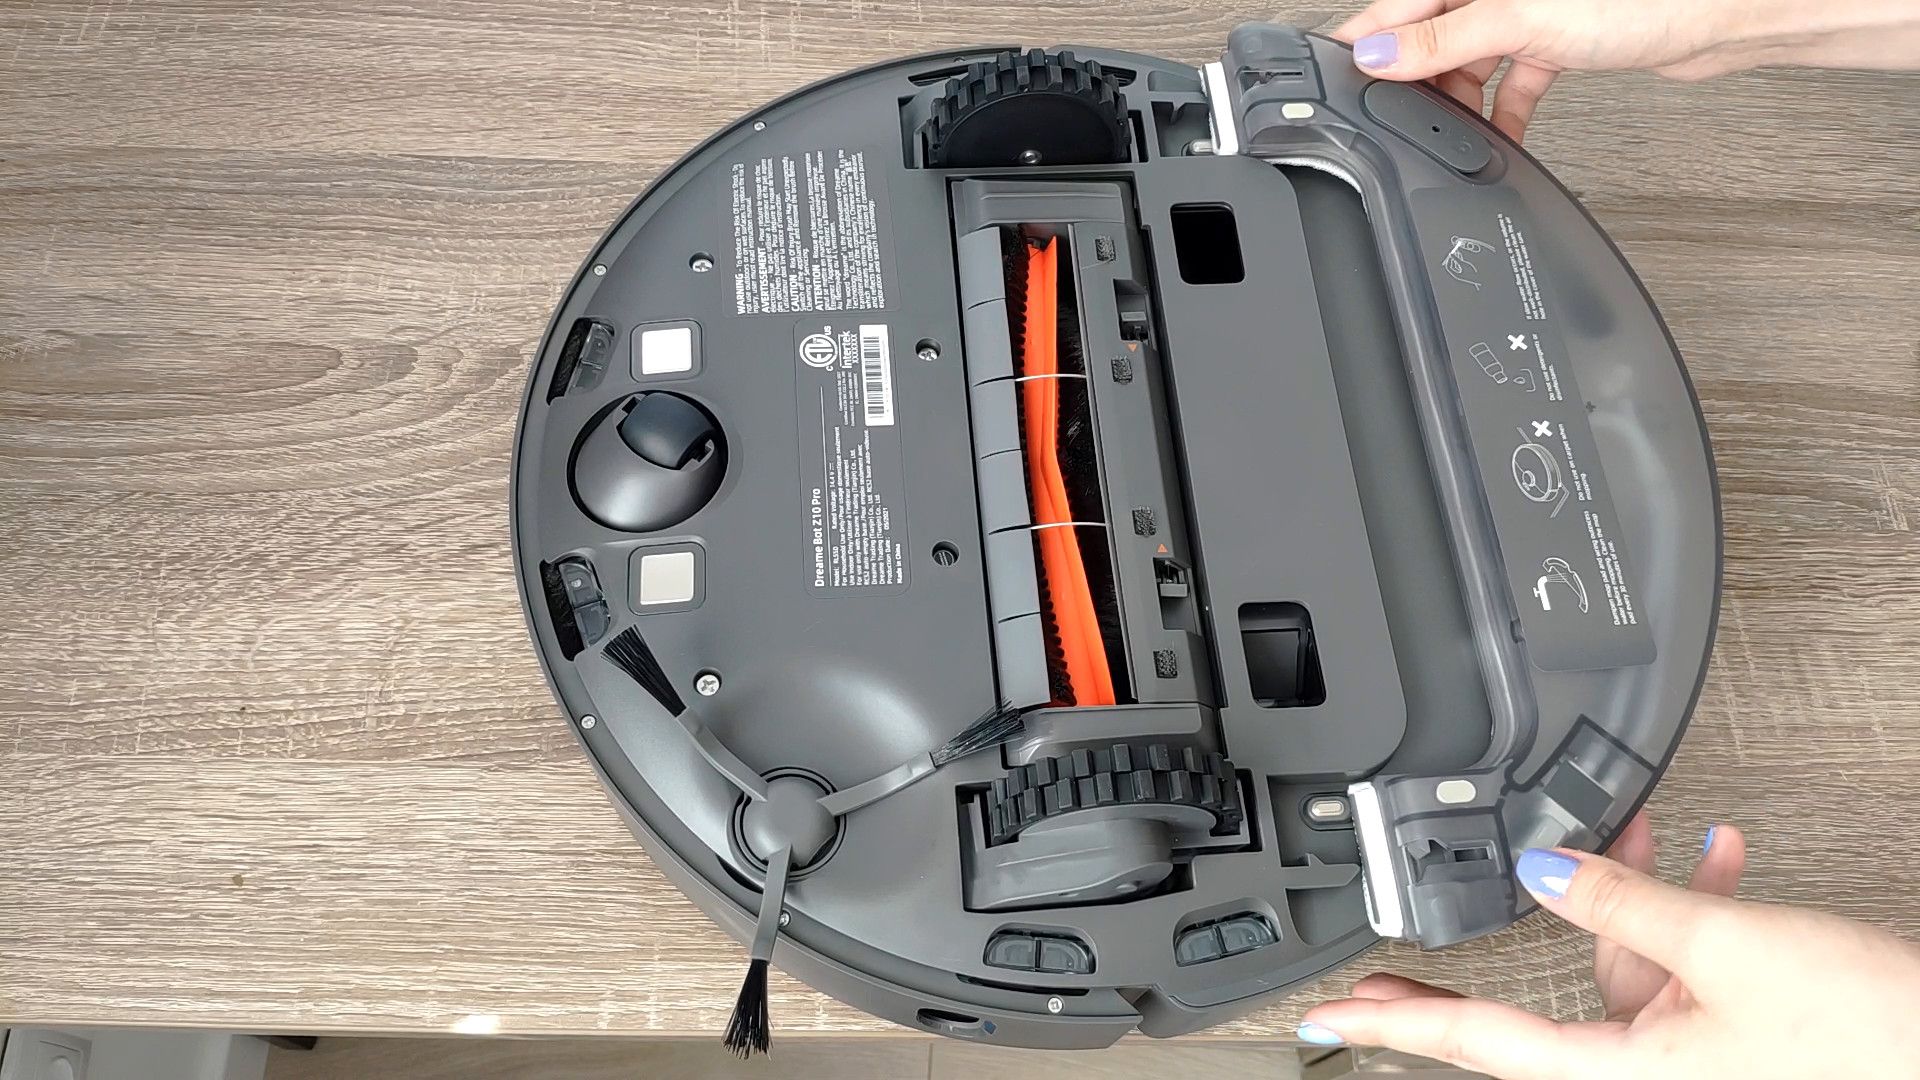 The Dreame Z10 Pro Review: A Powerful Robot Vacuum With Self ...